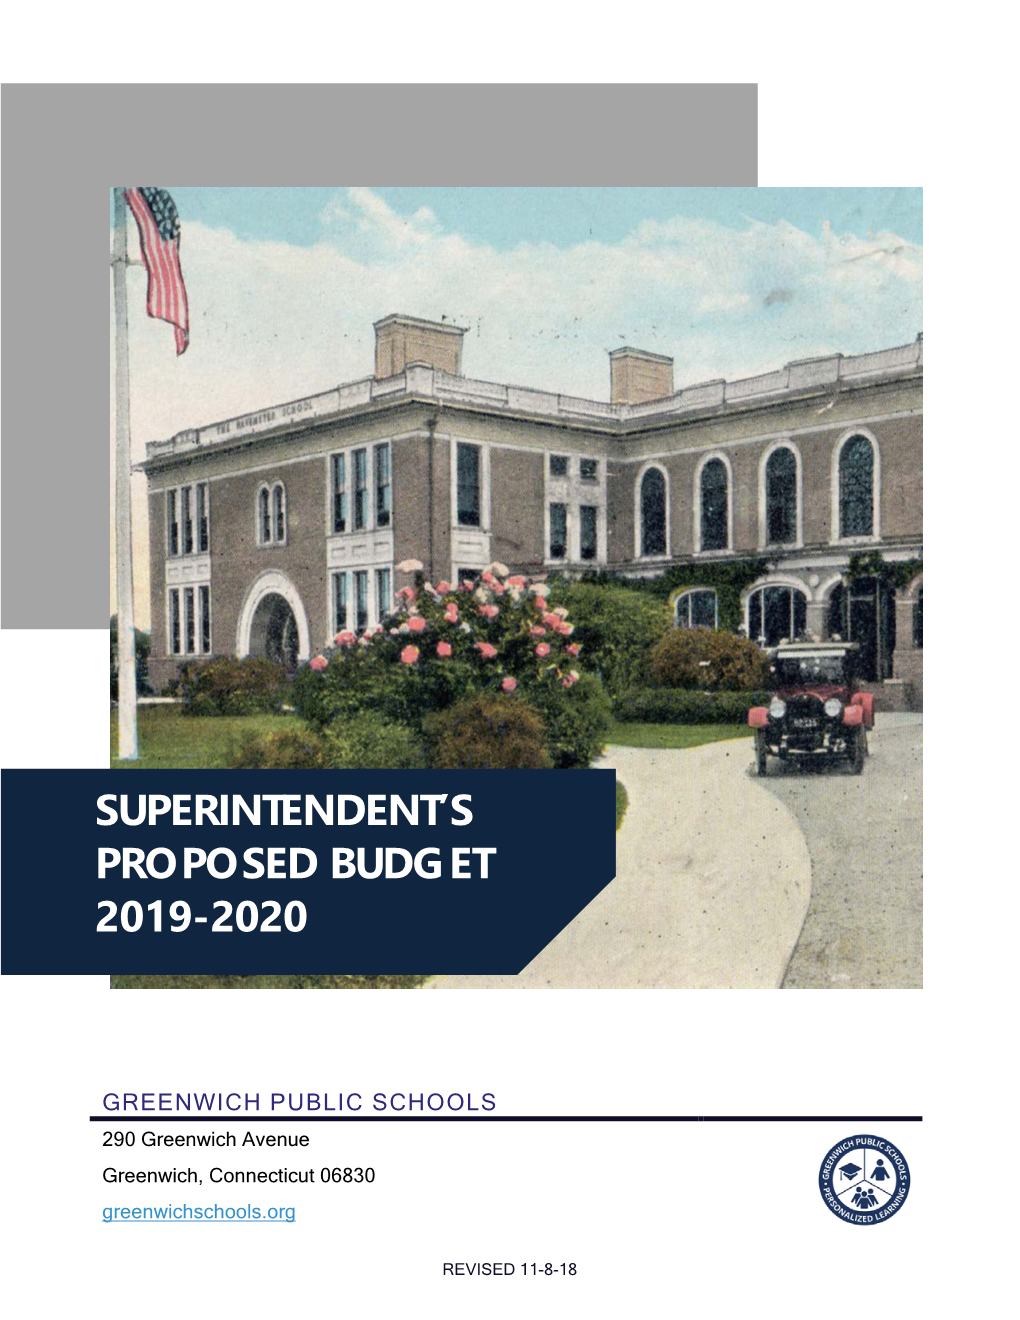 Superintendent's Proposed Budget 2019-2020